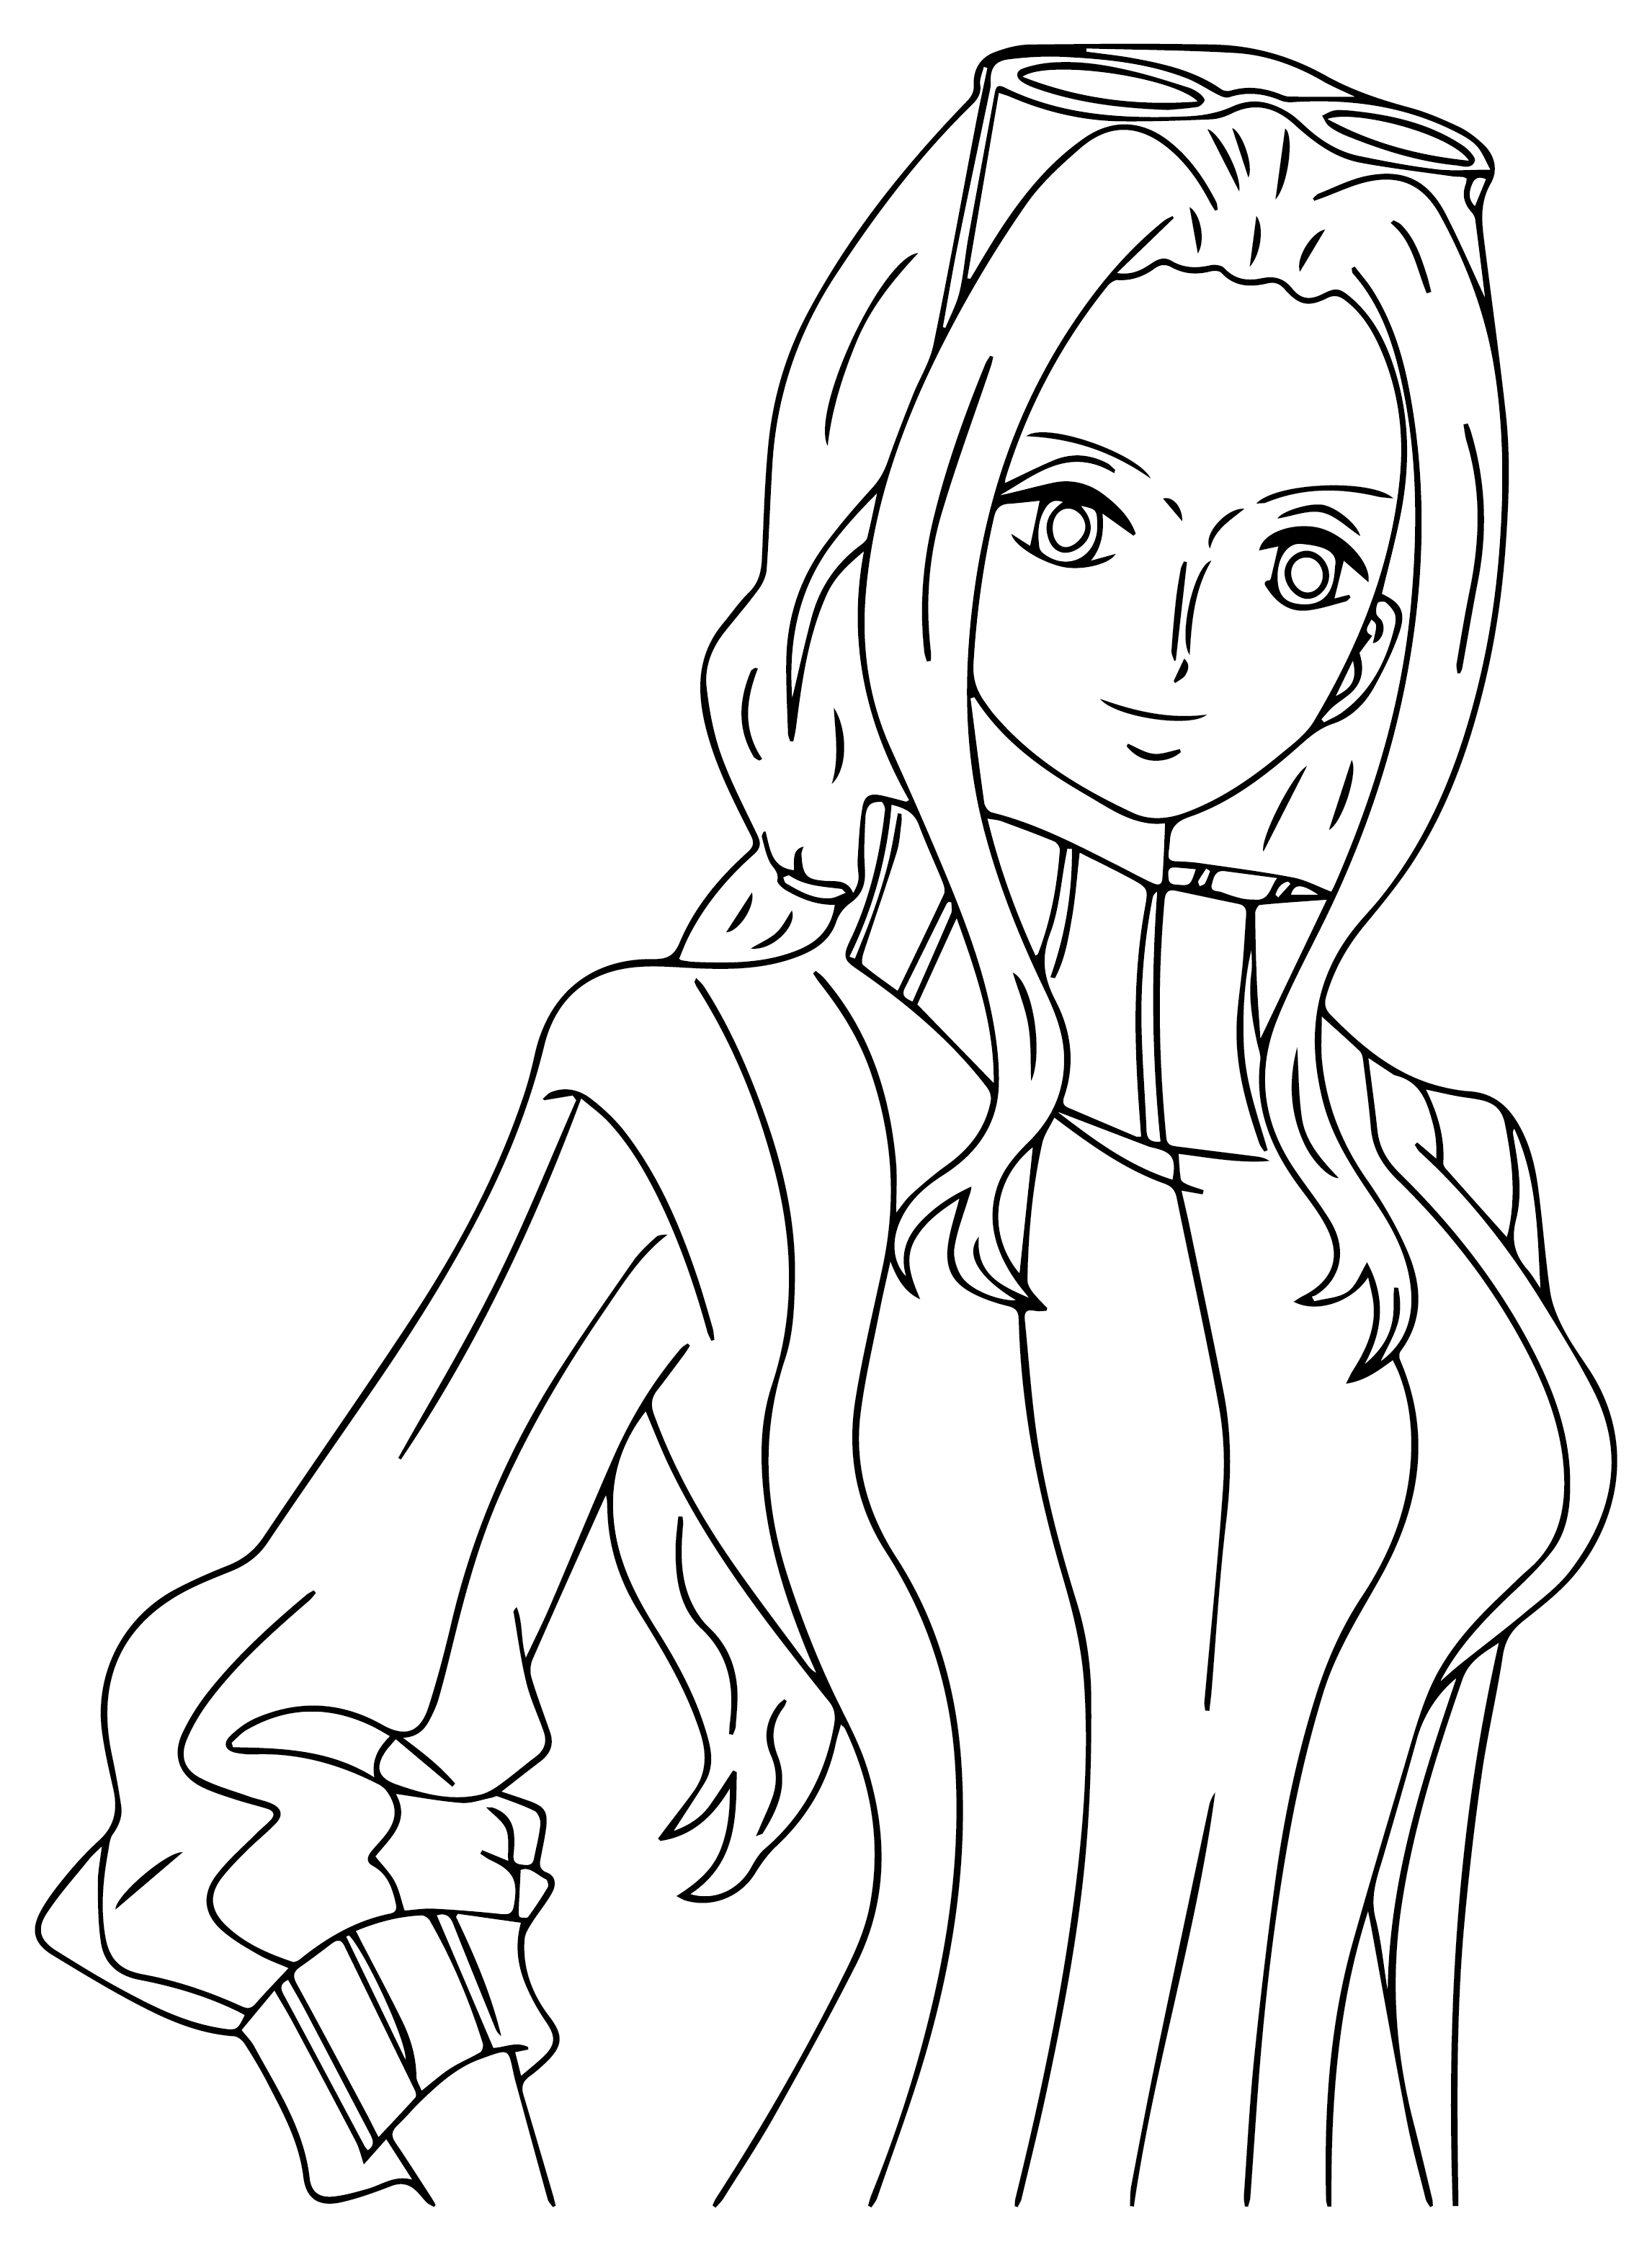 Nico Robin Coloring Sheet - Free Printable Coloring Pages